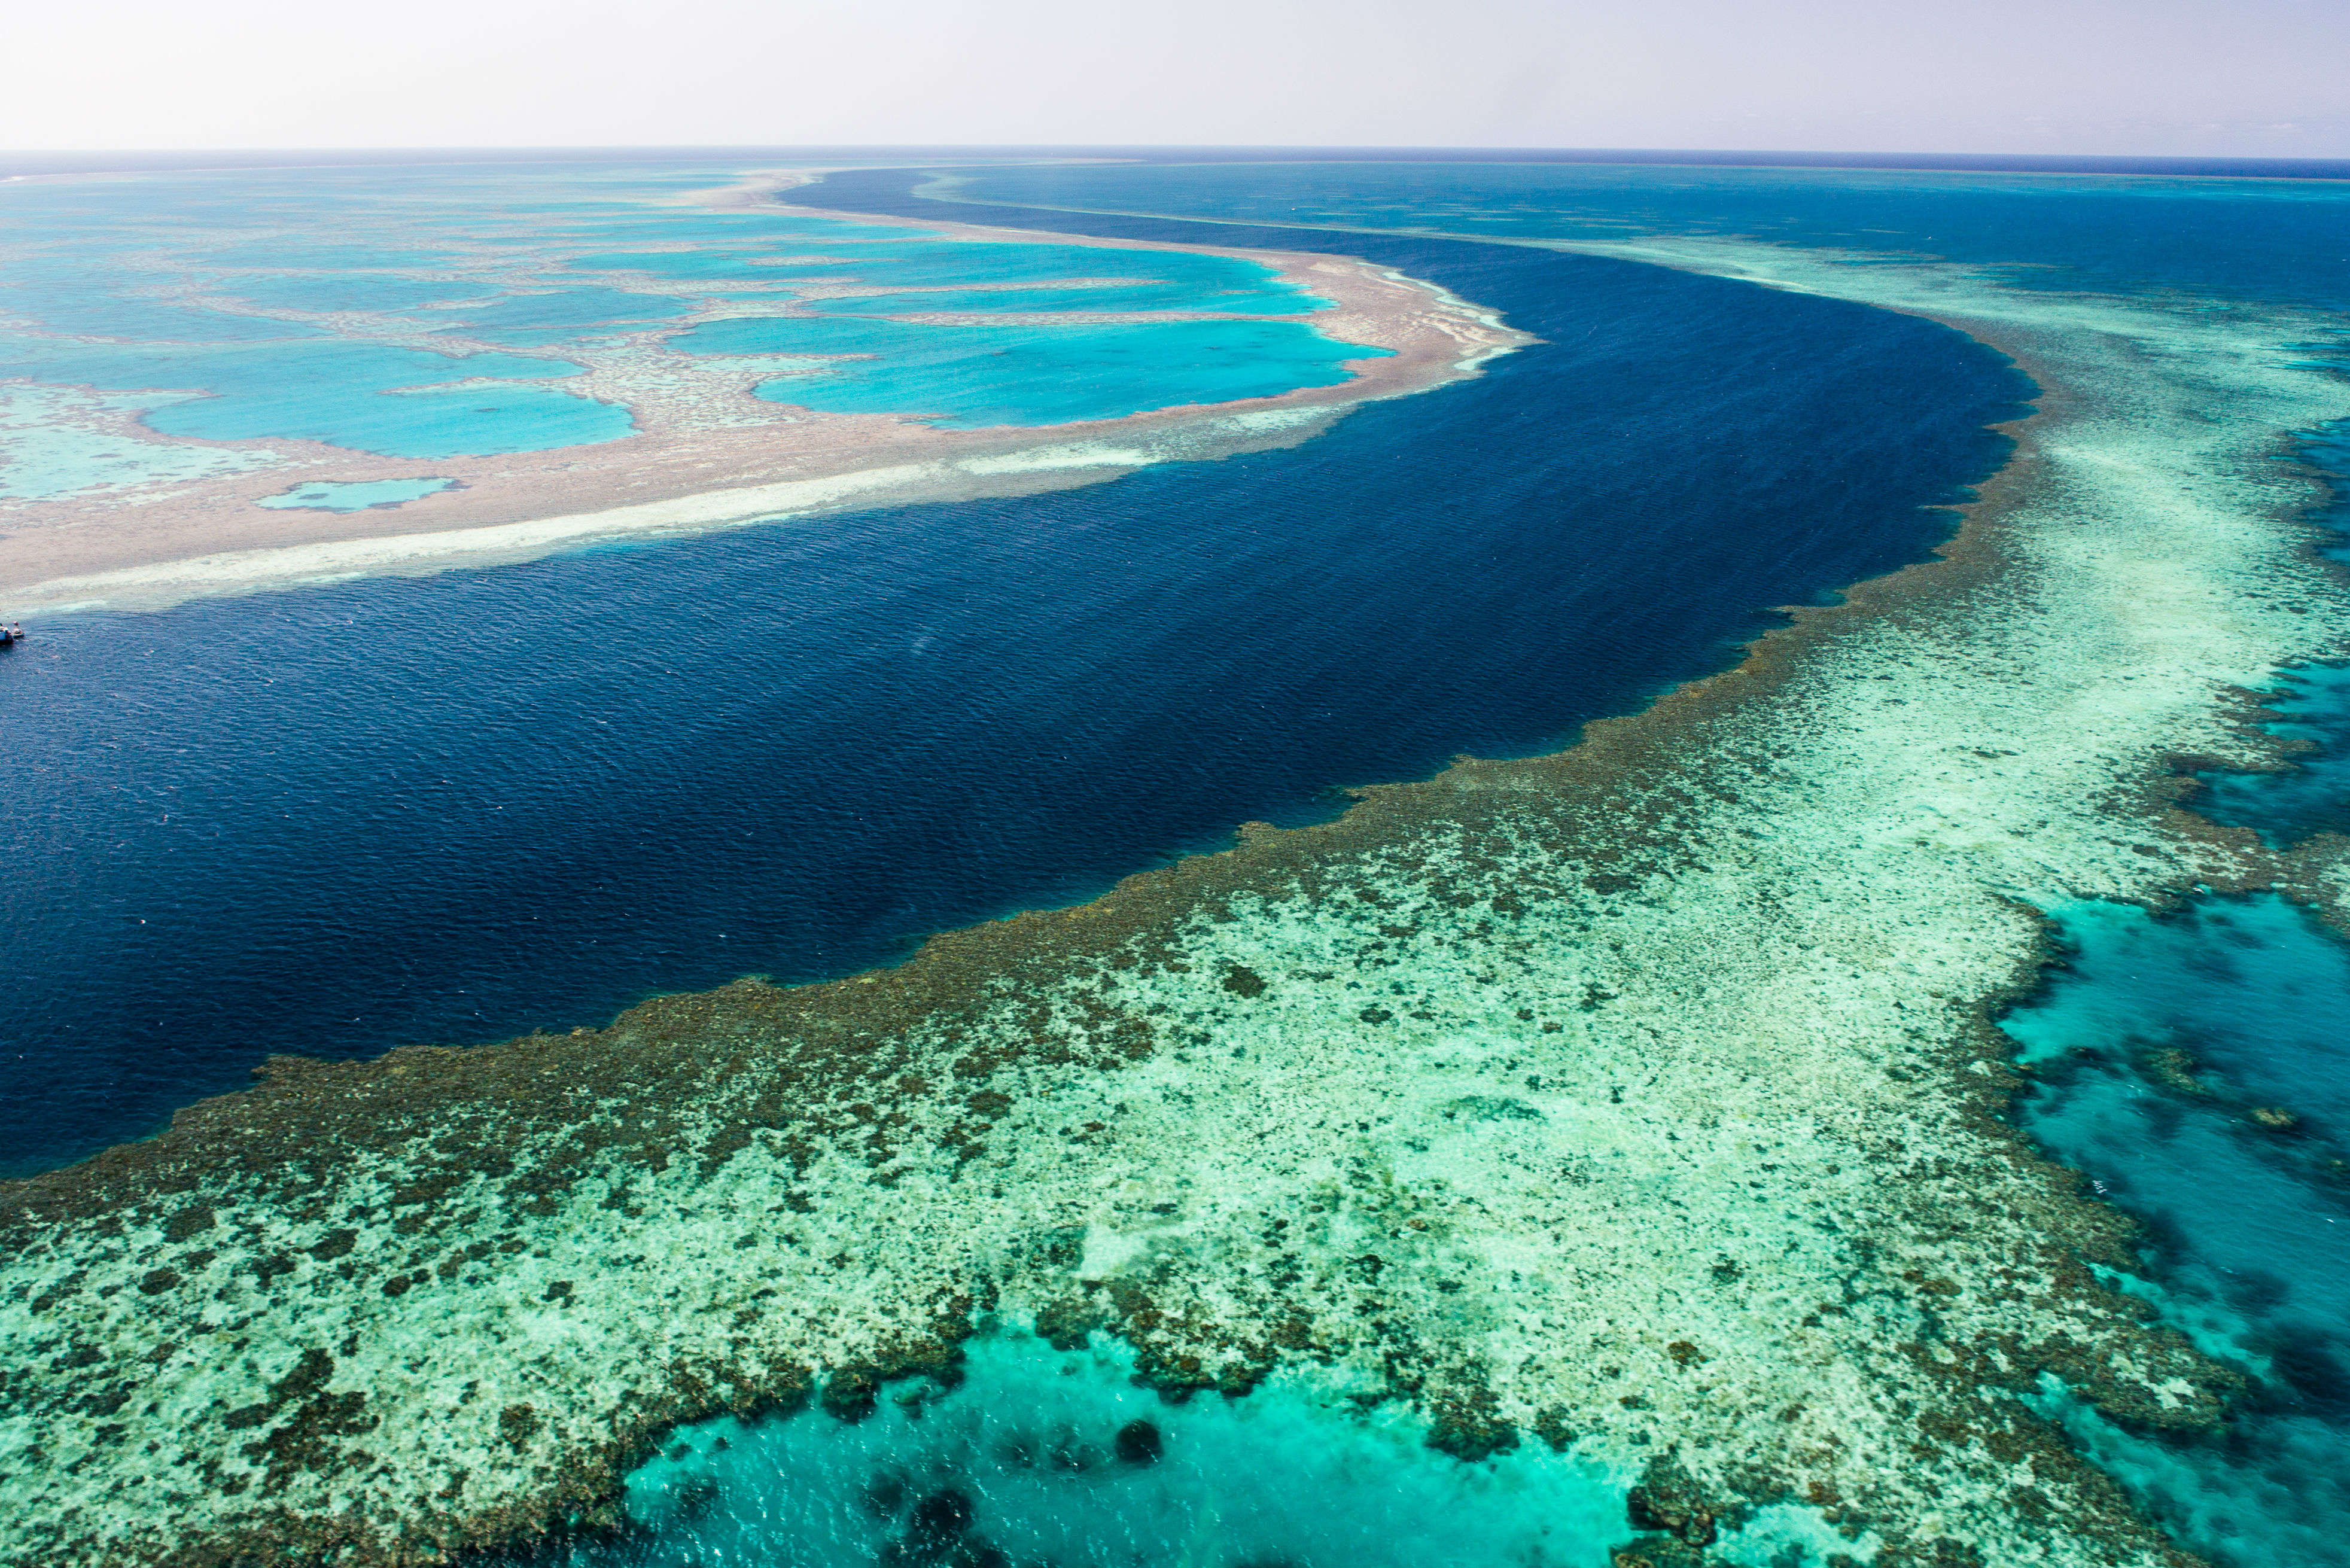 The Great Barrier Reef is in very poor shape, suggests report